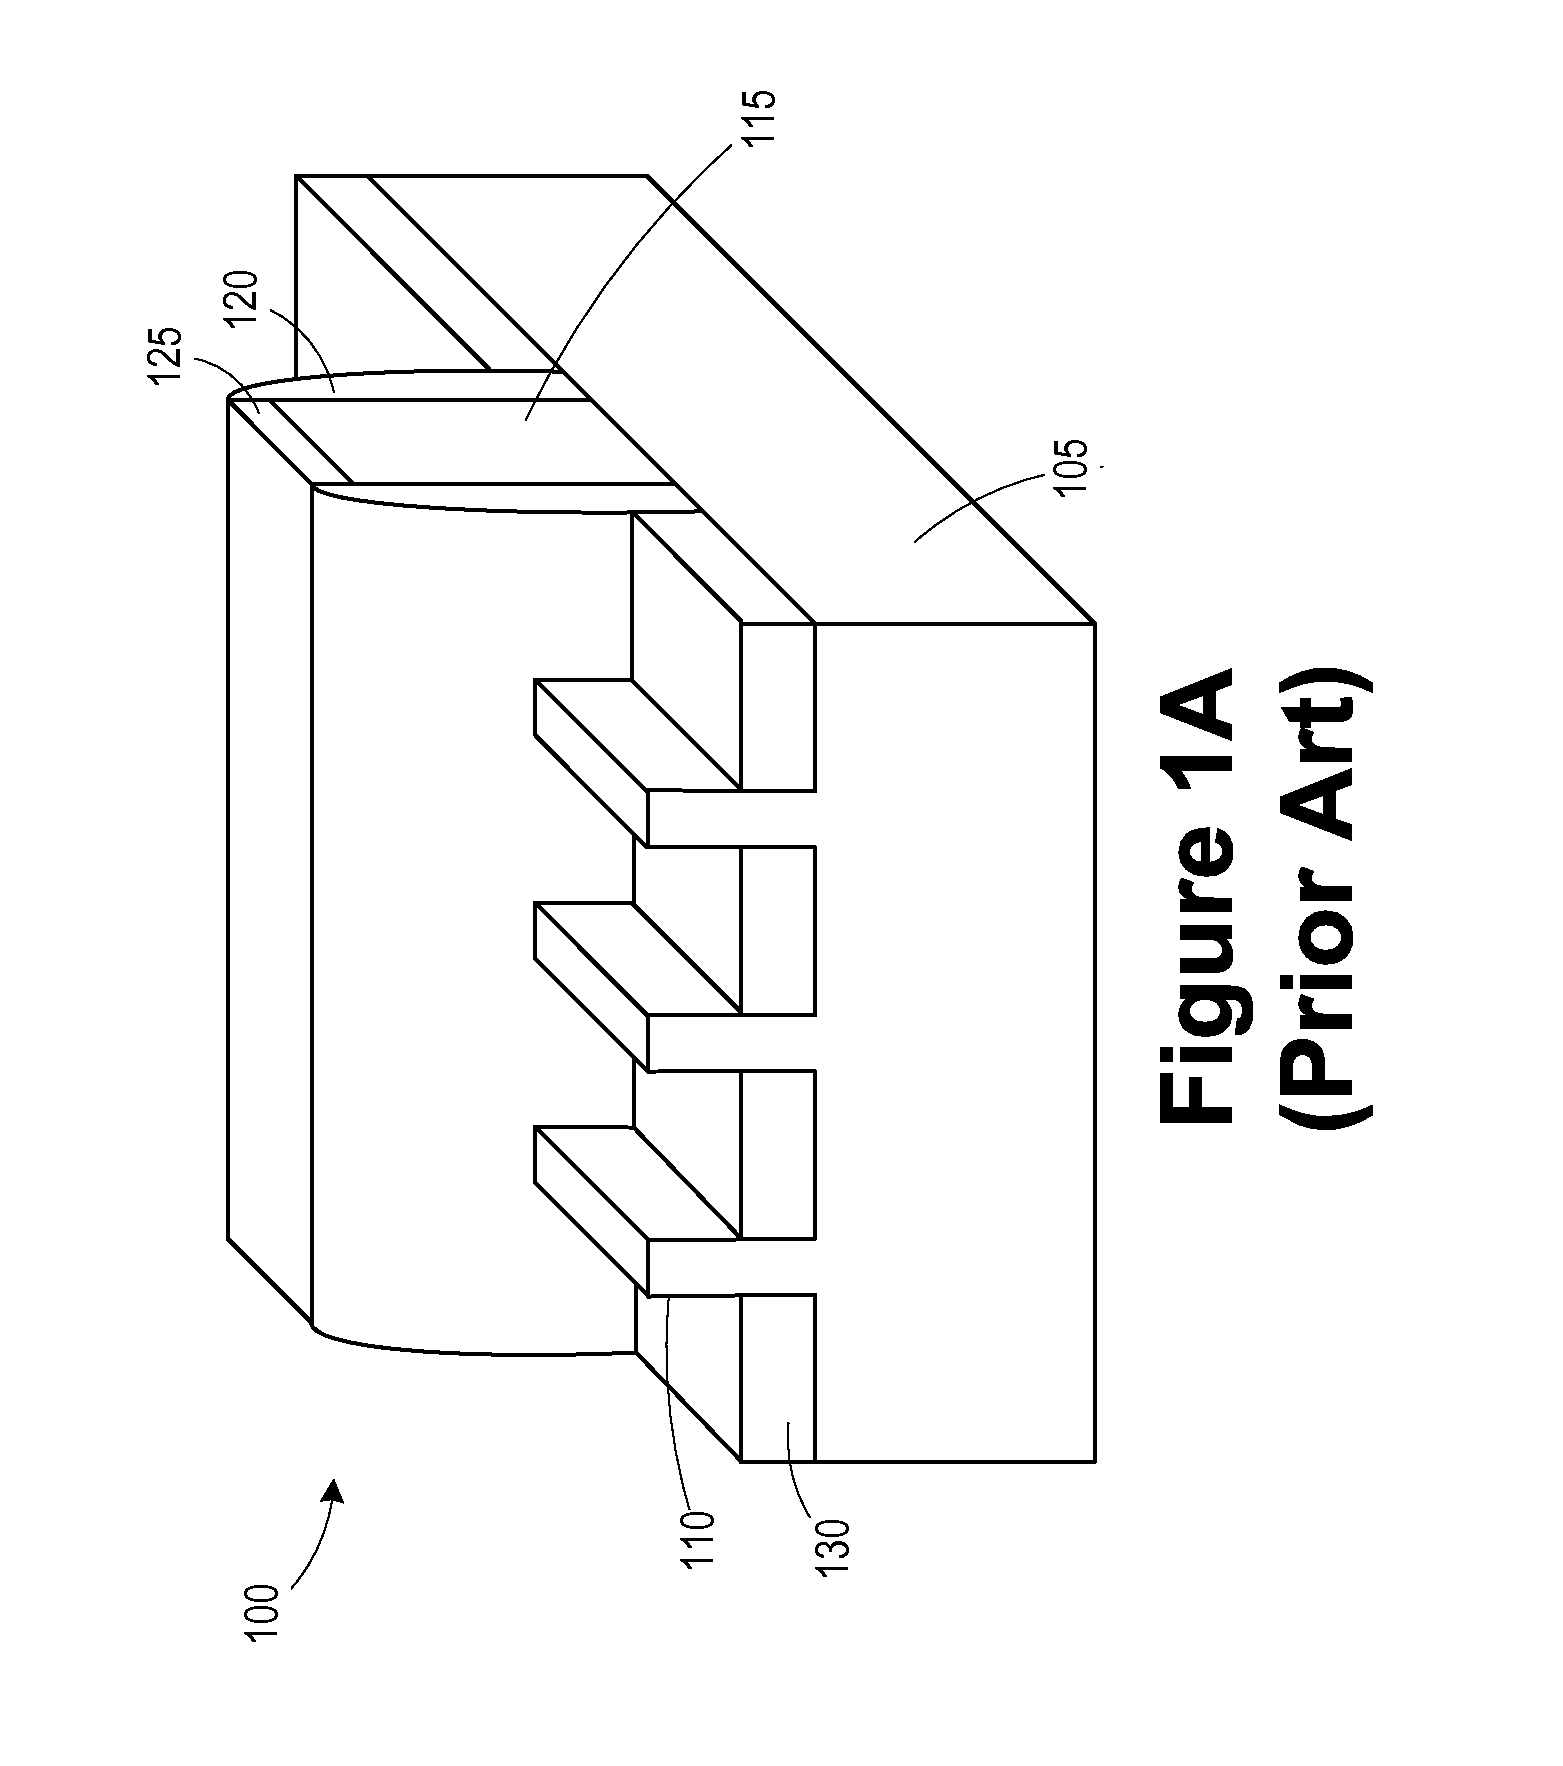 Method for forming single diffusion breaks between finFET devices and the resulting devices